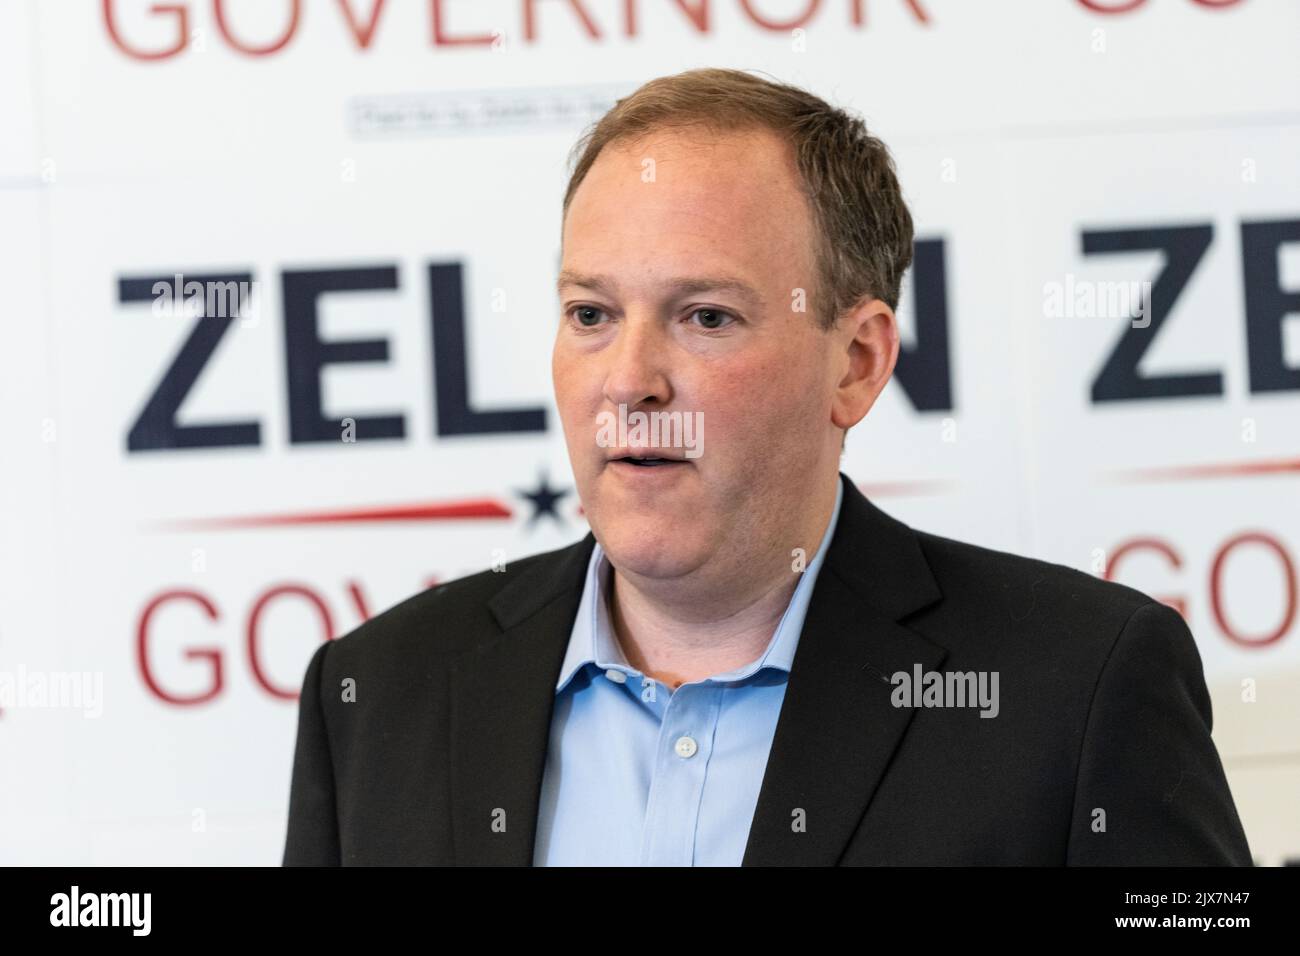 New York, NY - September 6, 2022: Republican and Conservative Parties nominee for Governor Lee Zeldin press conference on issue of debate at Zeldin NYC campaign headquarters Stock Photo